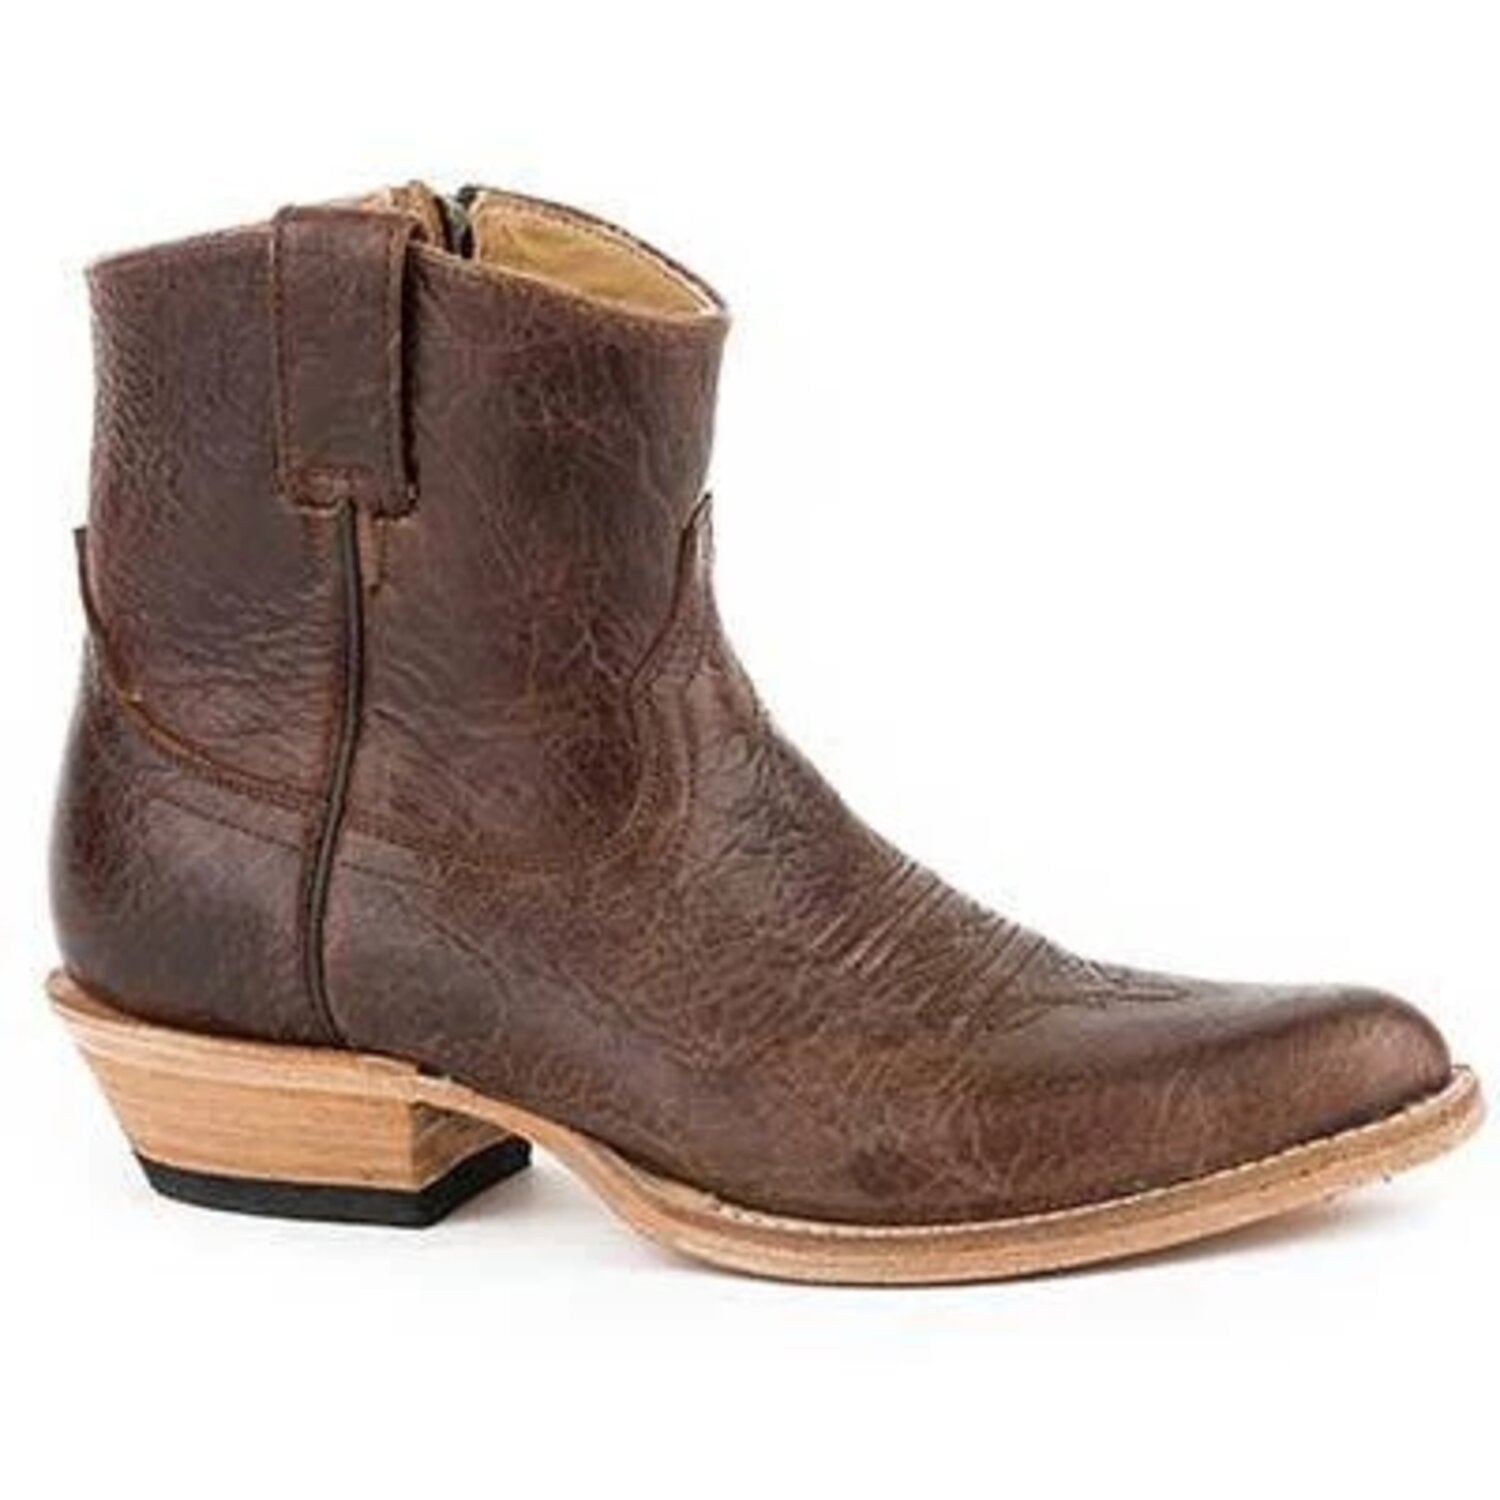 bison leather boots